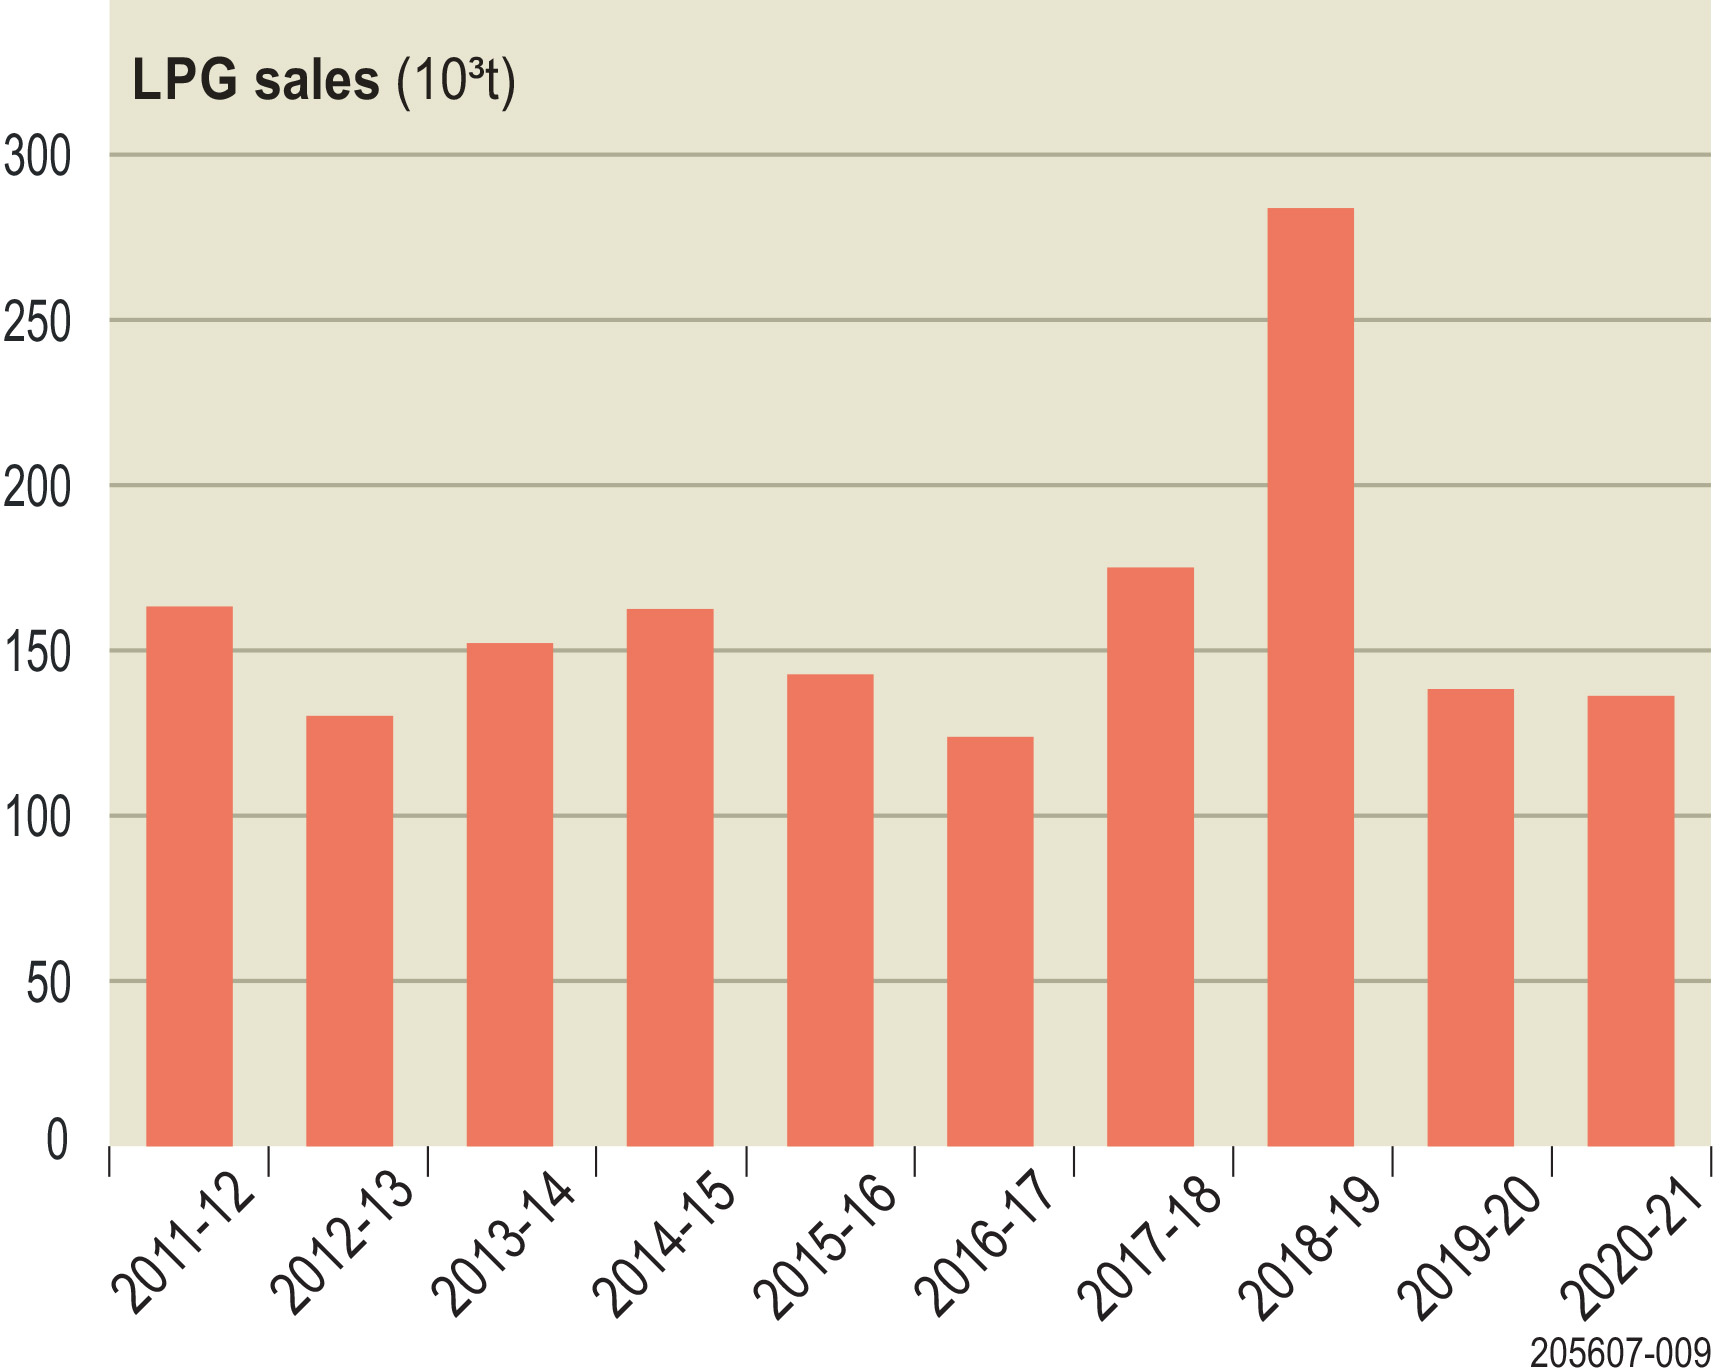 Graph showing LPG sales in South Australia between 2011-12 and 2020-21 financial years.